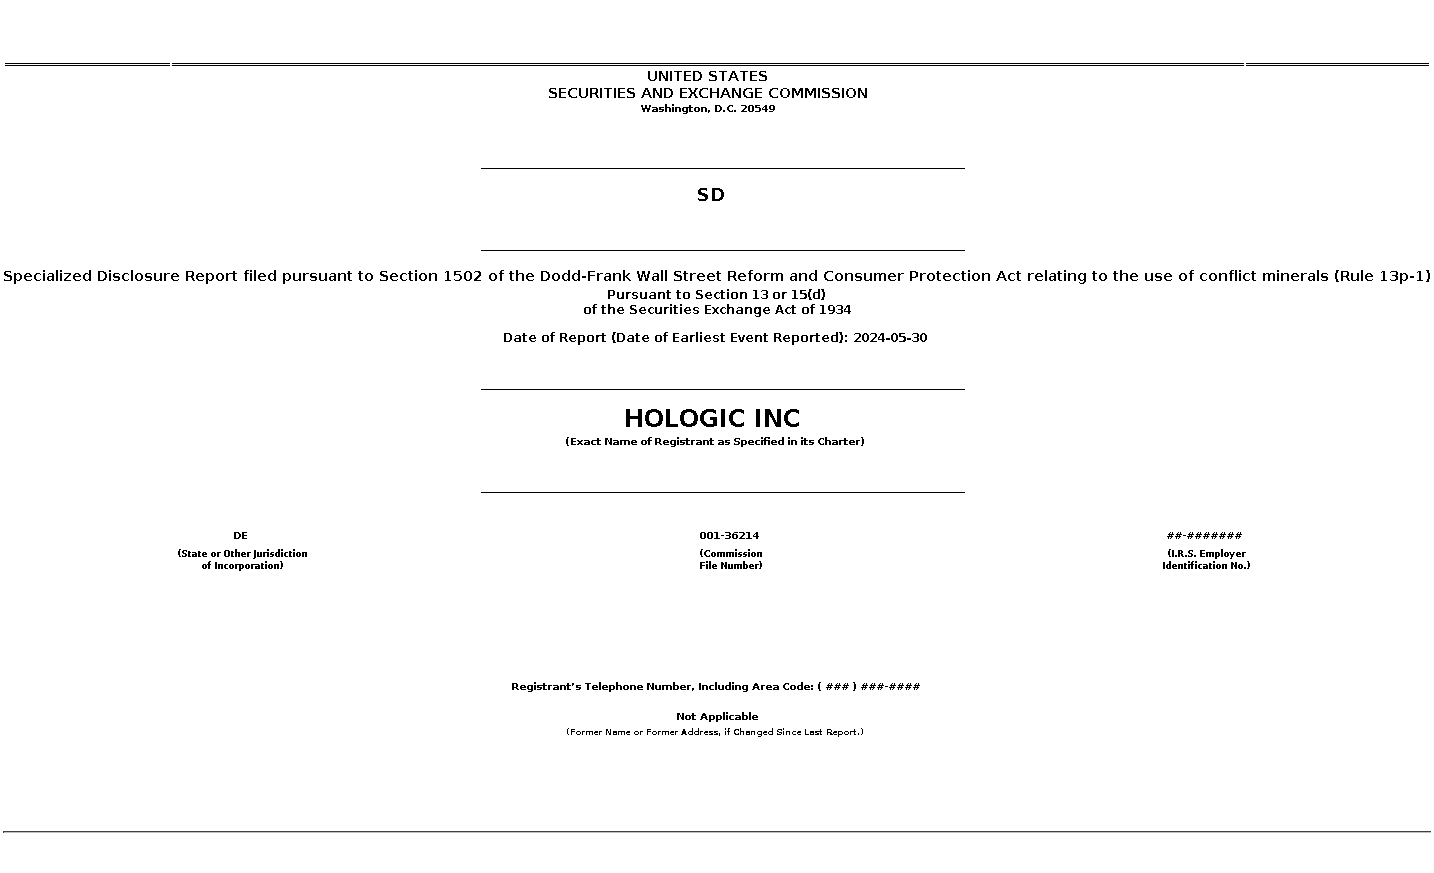 HOLX : SD Specialized Disclosure Report filed pursuant to Section 1502 of the Dodd-Frank Wall Street Reform and Consumer Protection Act relating to the use of conflict minerals (Rule 13p-1)